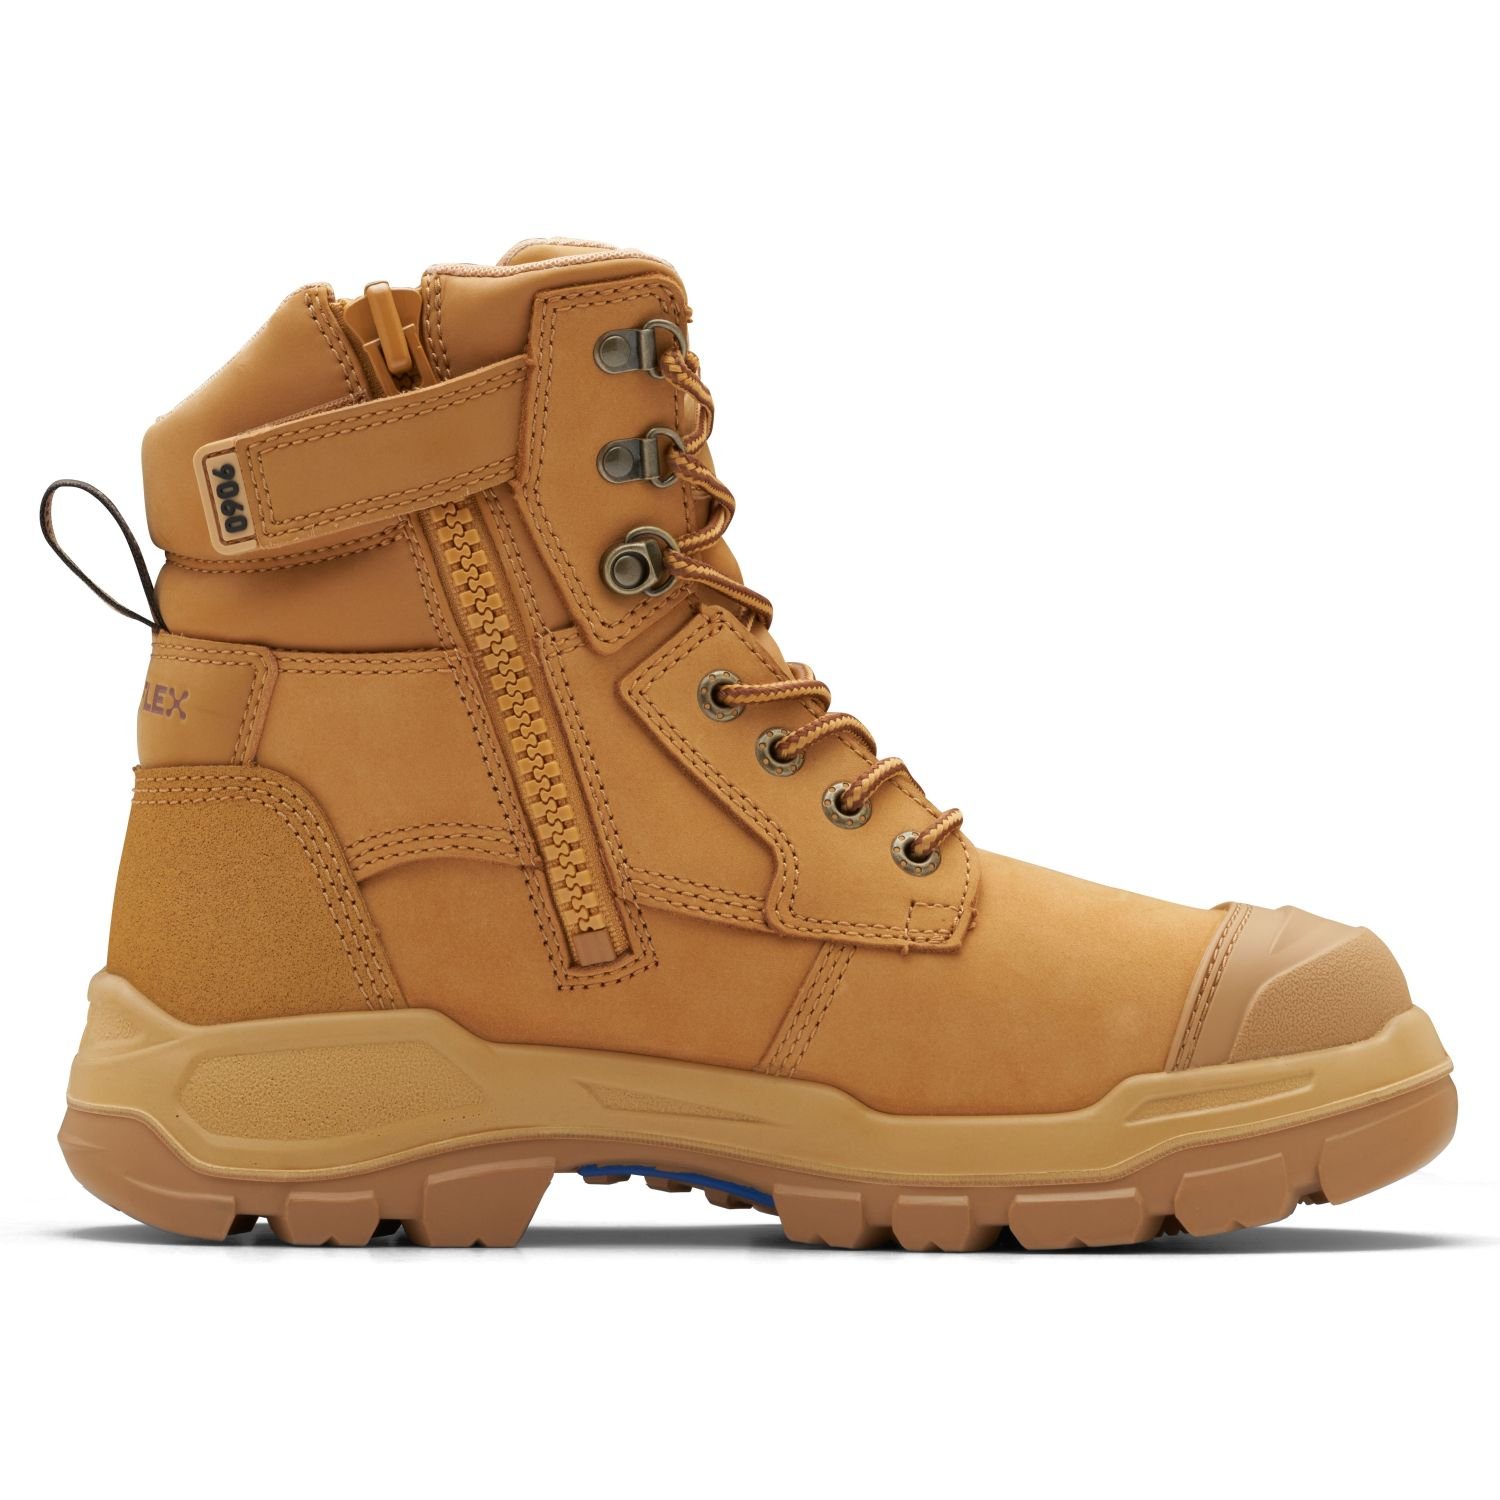 Blundstone 9060 Lace Up/Zip Safety Boot Wheat